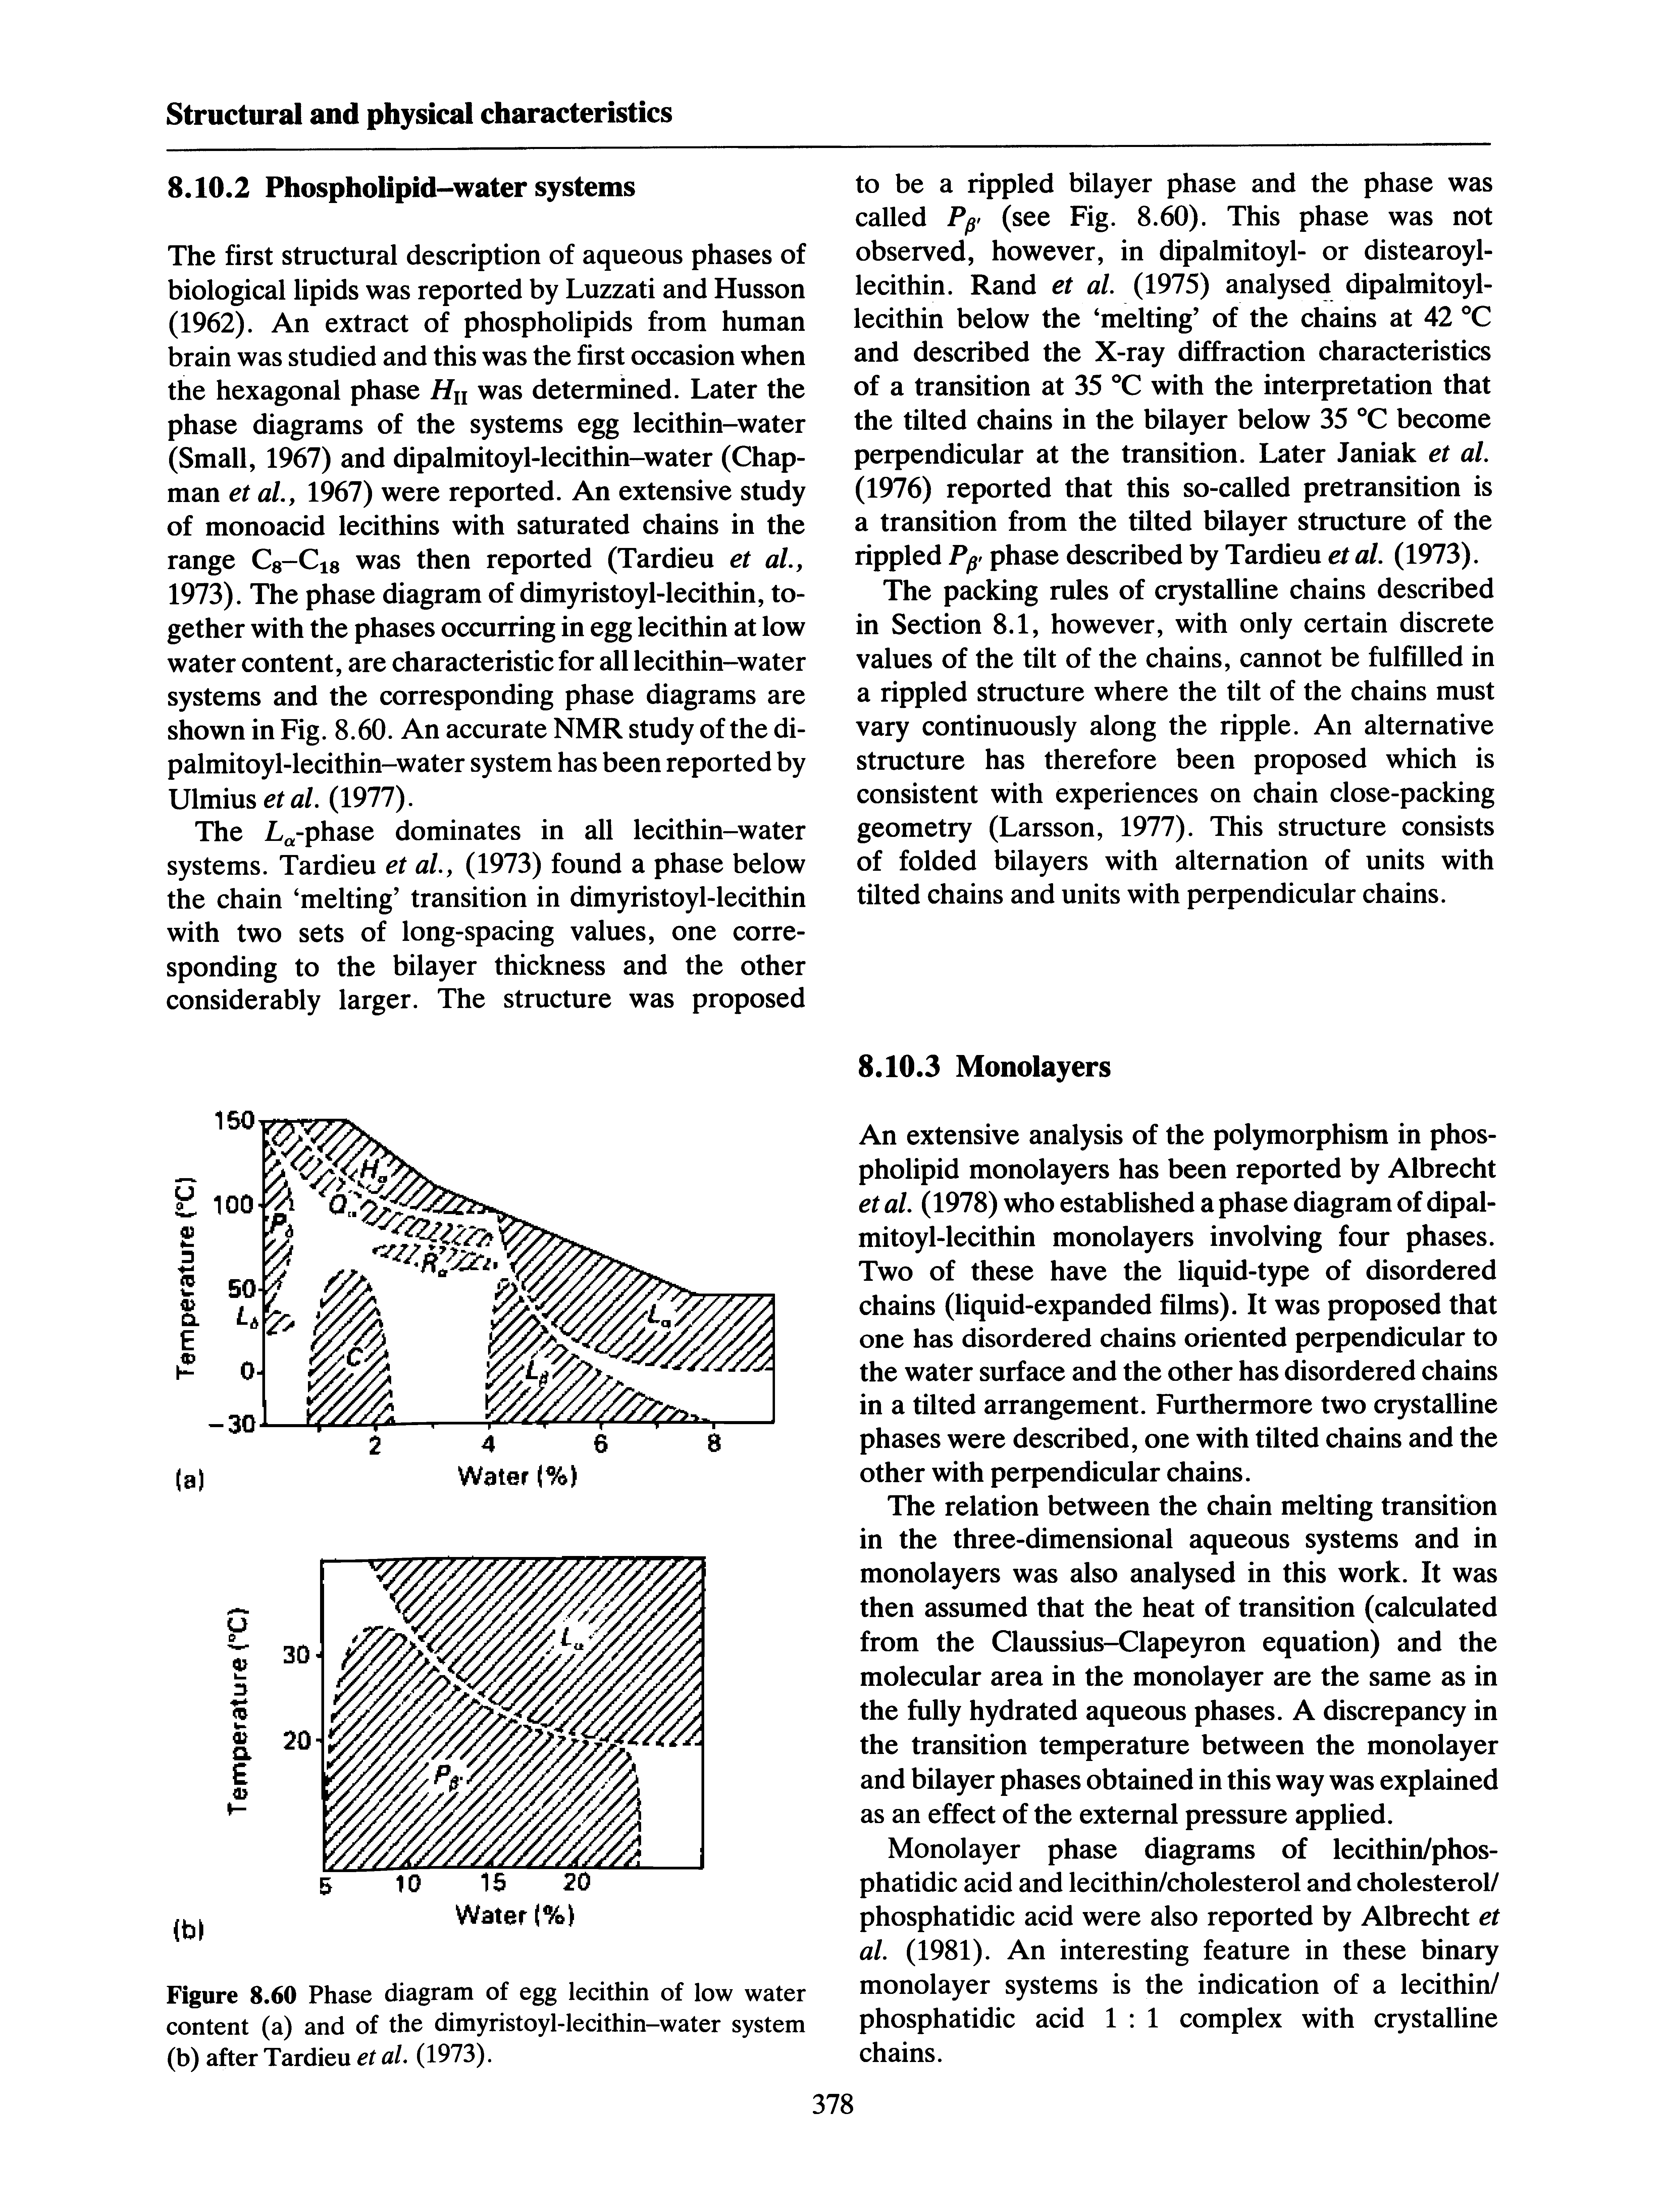 Figure 8.60 Phase diagram of egg lecithin of low water content (a) and of the dimyristoyl-lecithin-water system (b) after Tardieu et al. (1973).